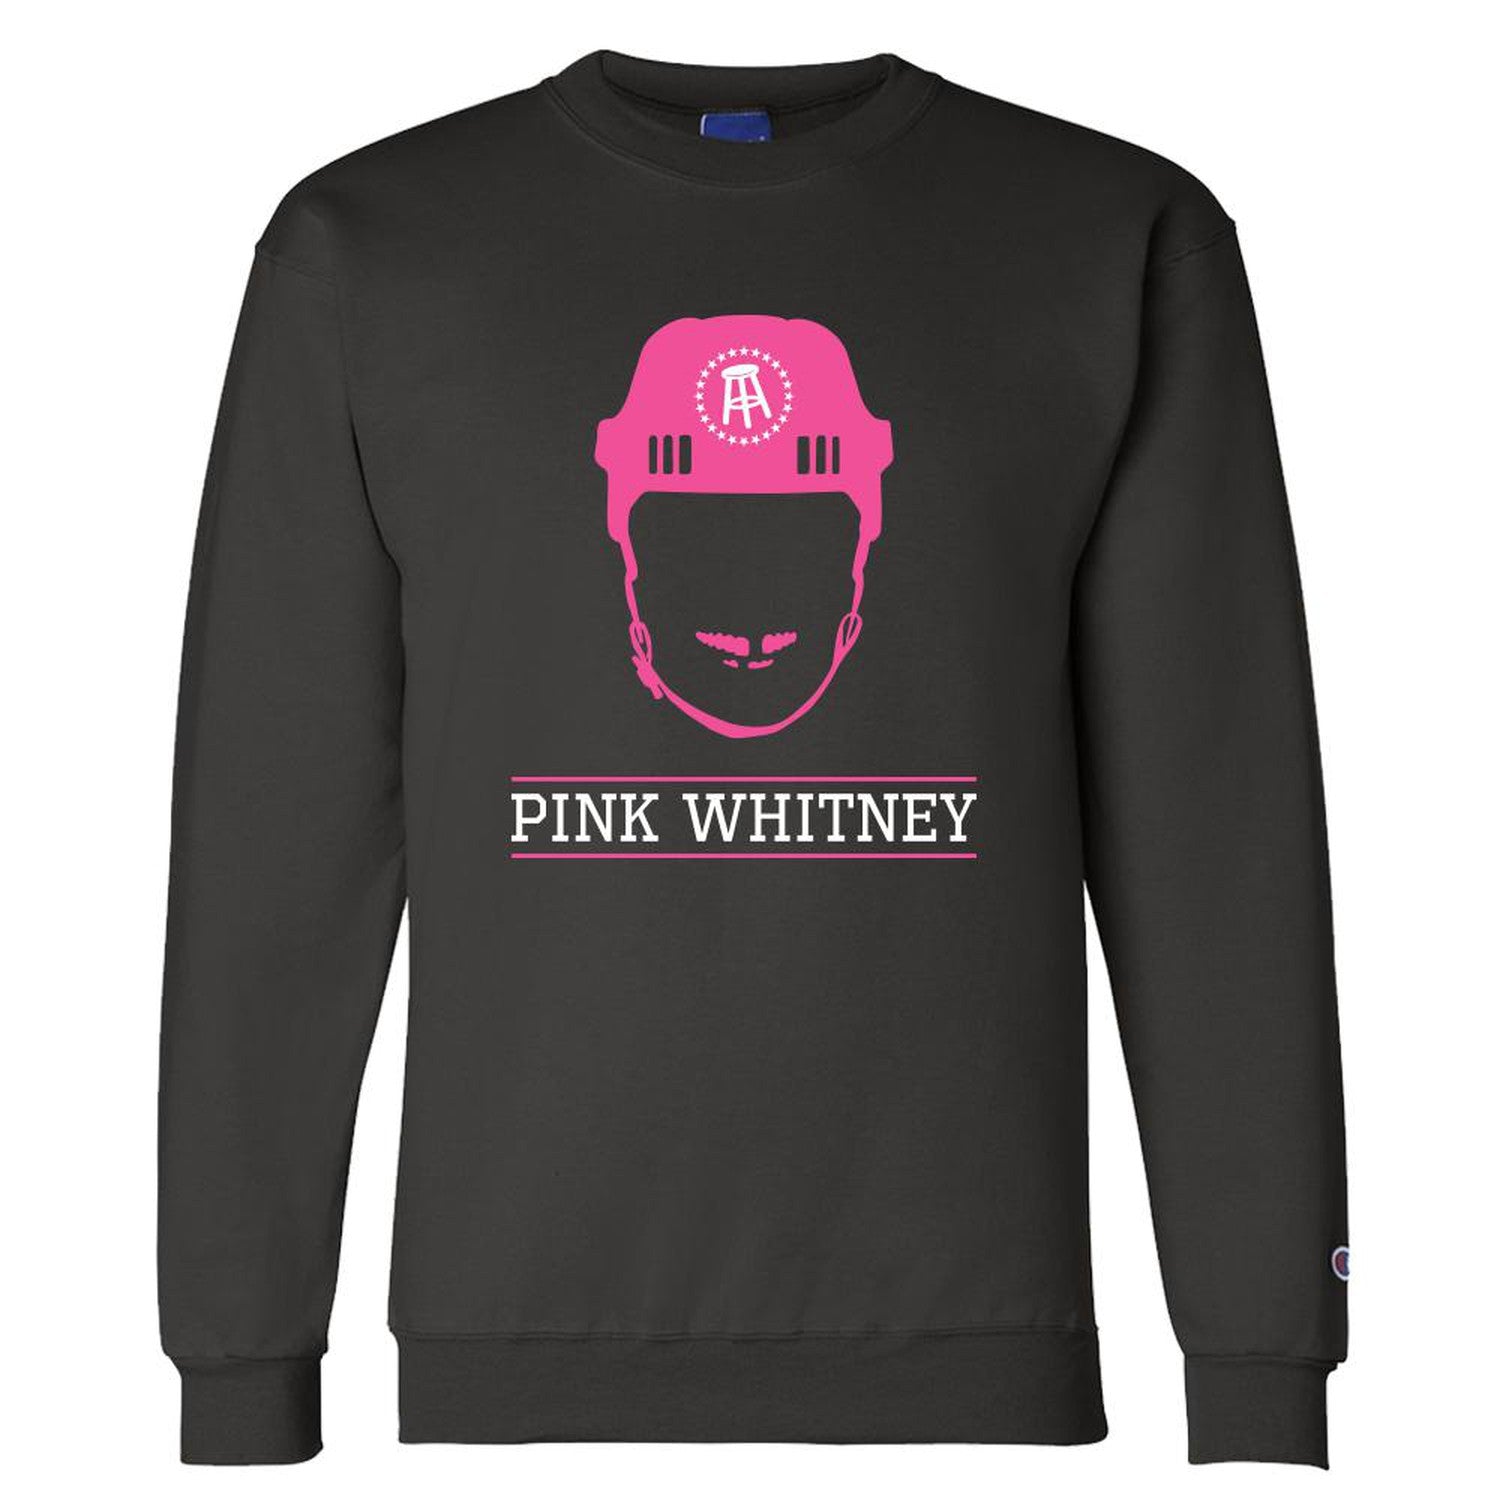 Made a simple jersey for Pink Whitney : r/SpittinChicletsPod